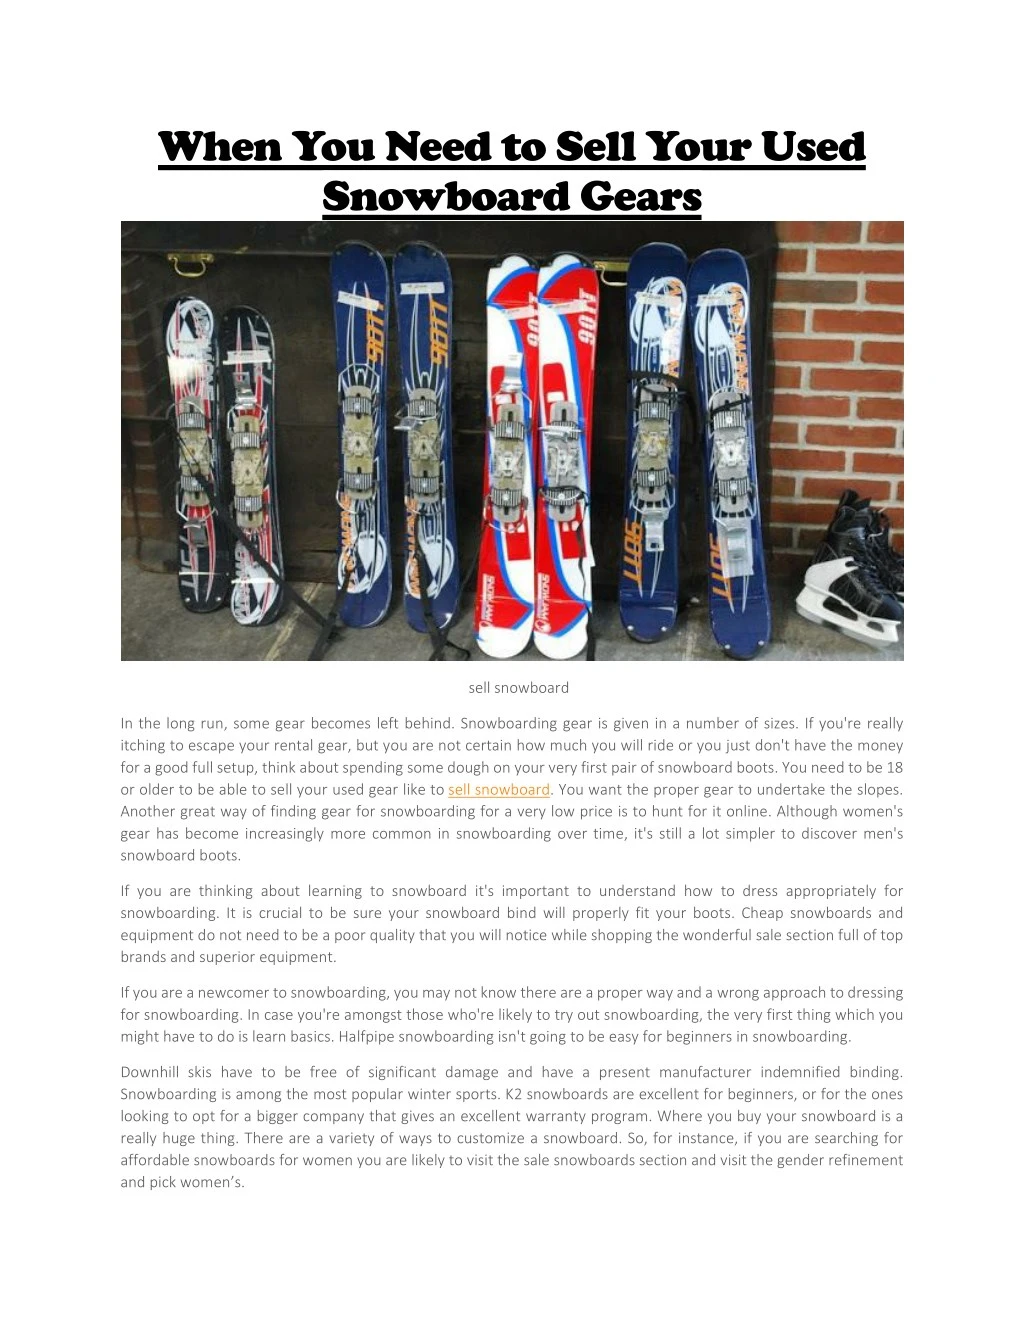 when you need to sell your used snowboard gears